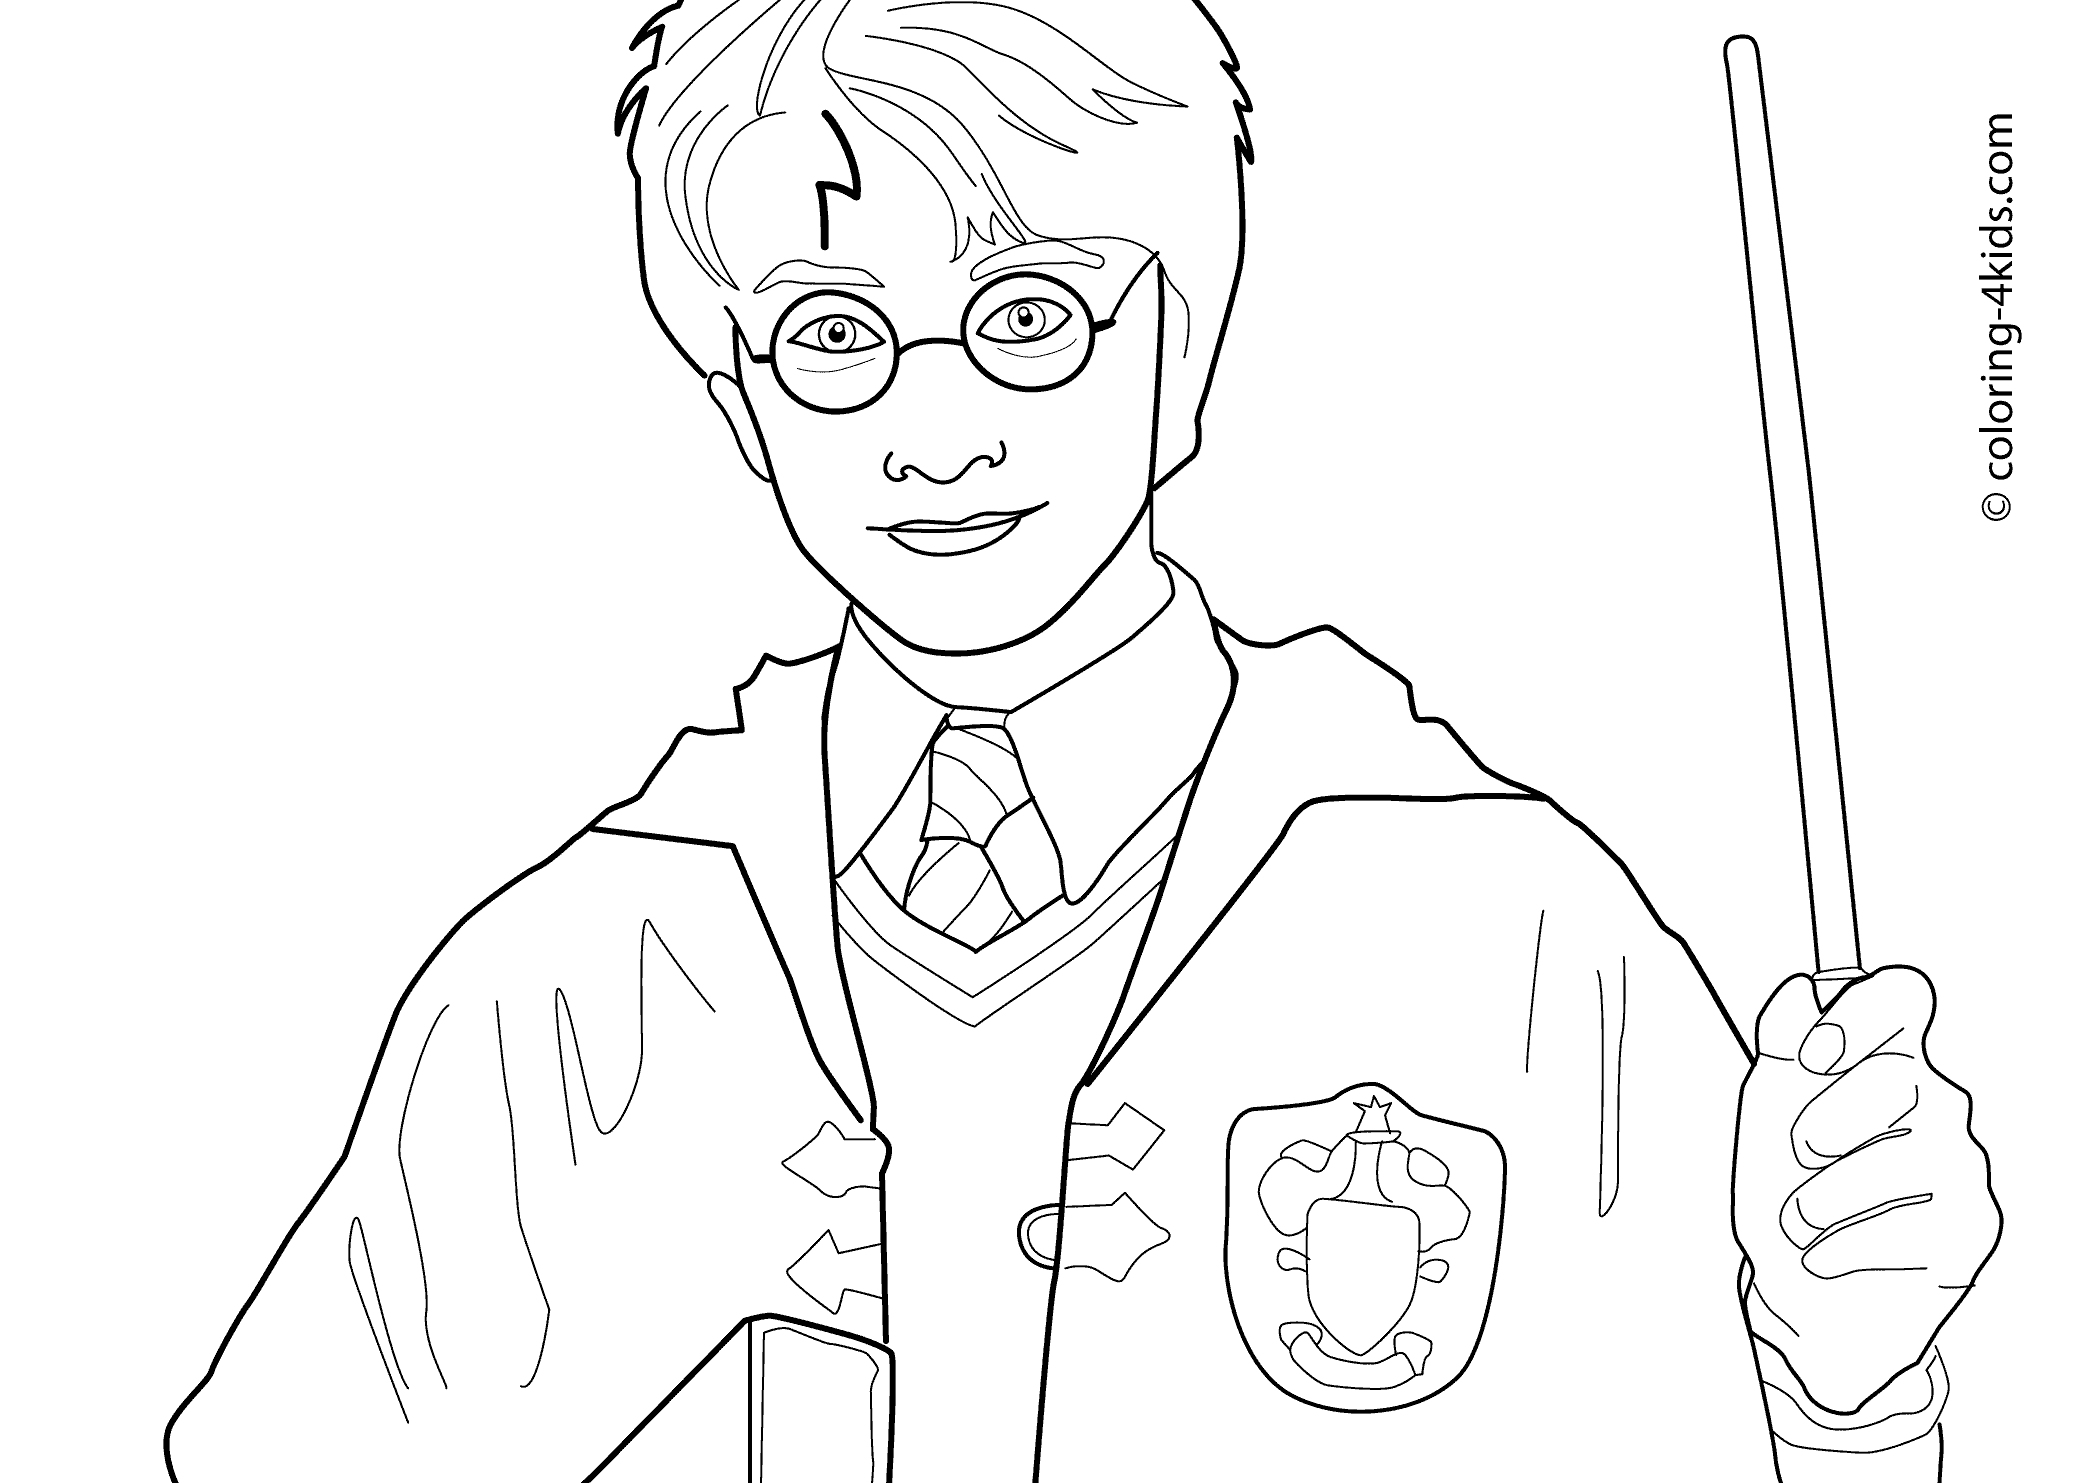 Image result for harry potter drawings outline harry potter coloring book harry potter coloring pages harry potter colors